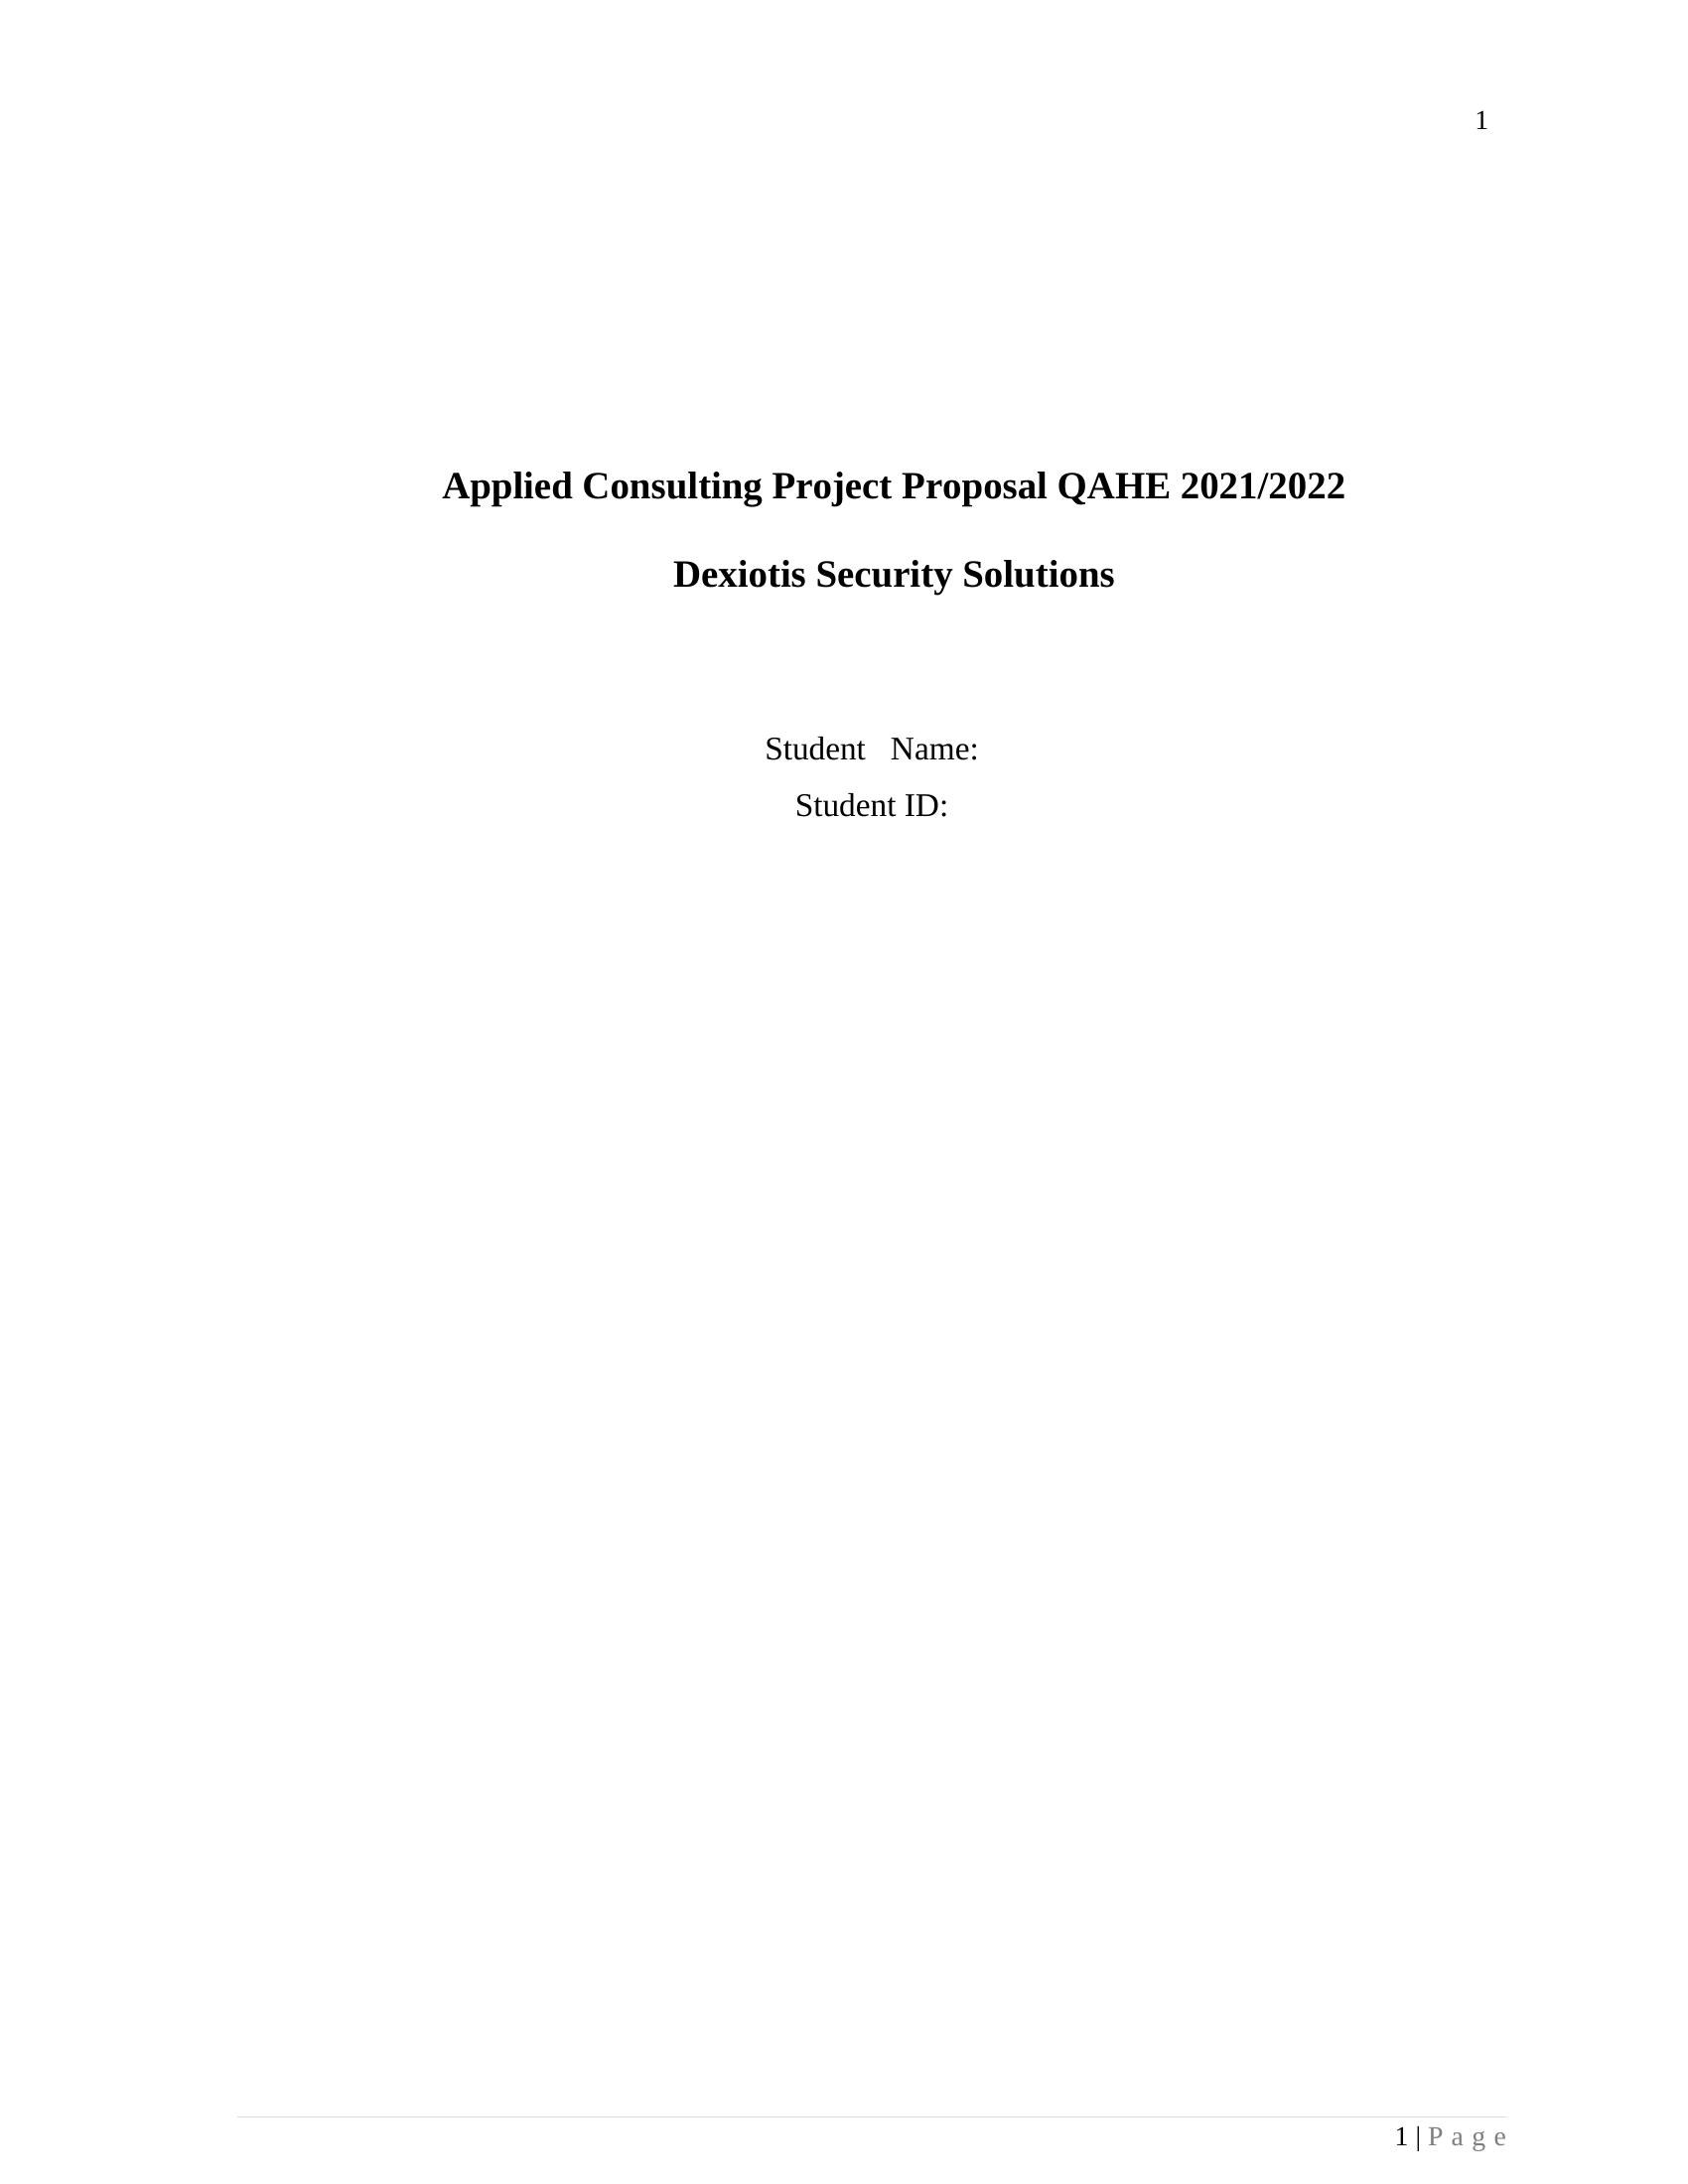 Applied Consulting Project Proposal QAHE _ Dexiotis Security Solutions